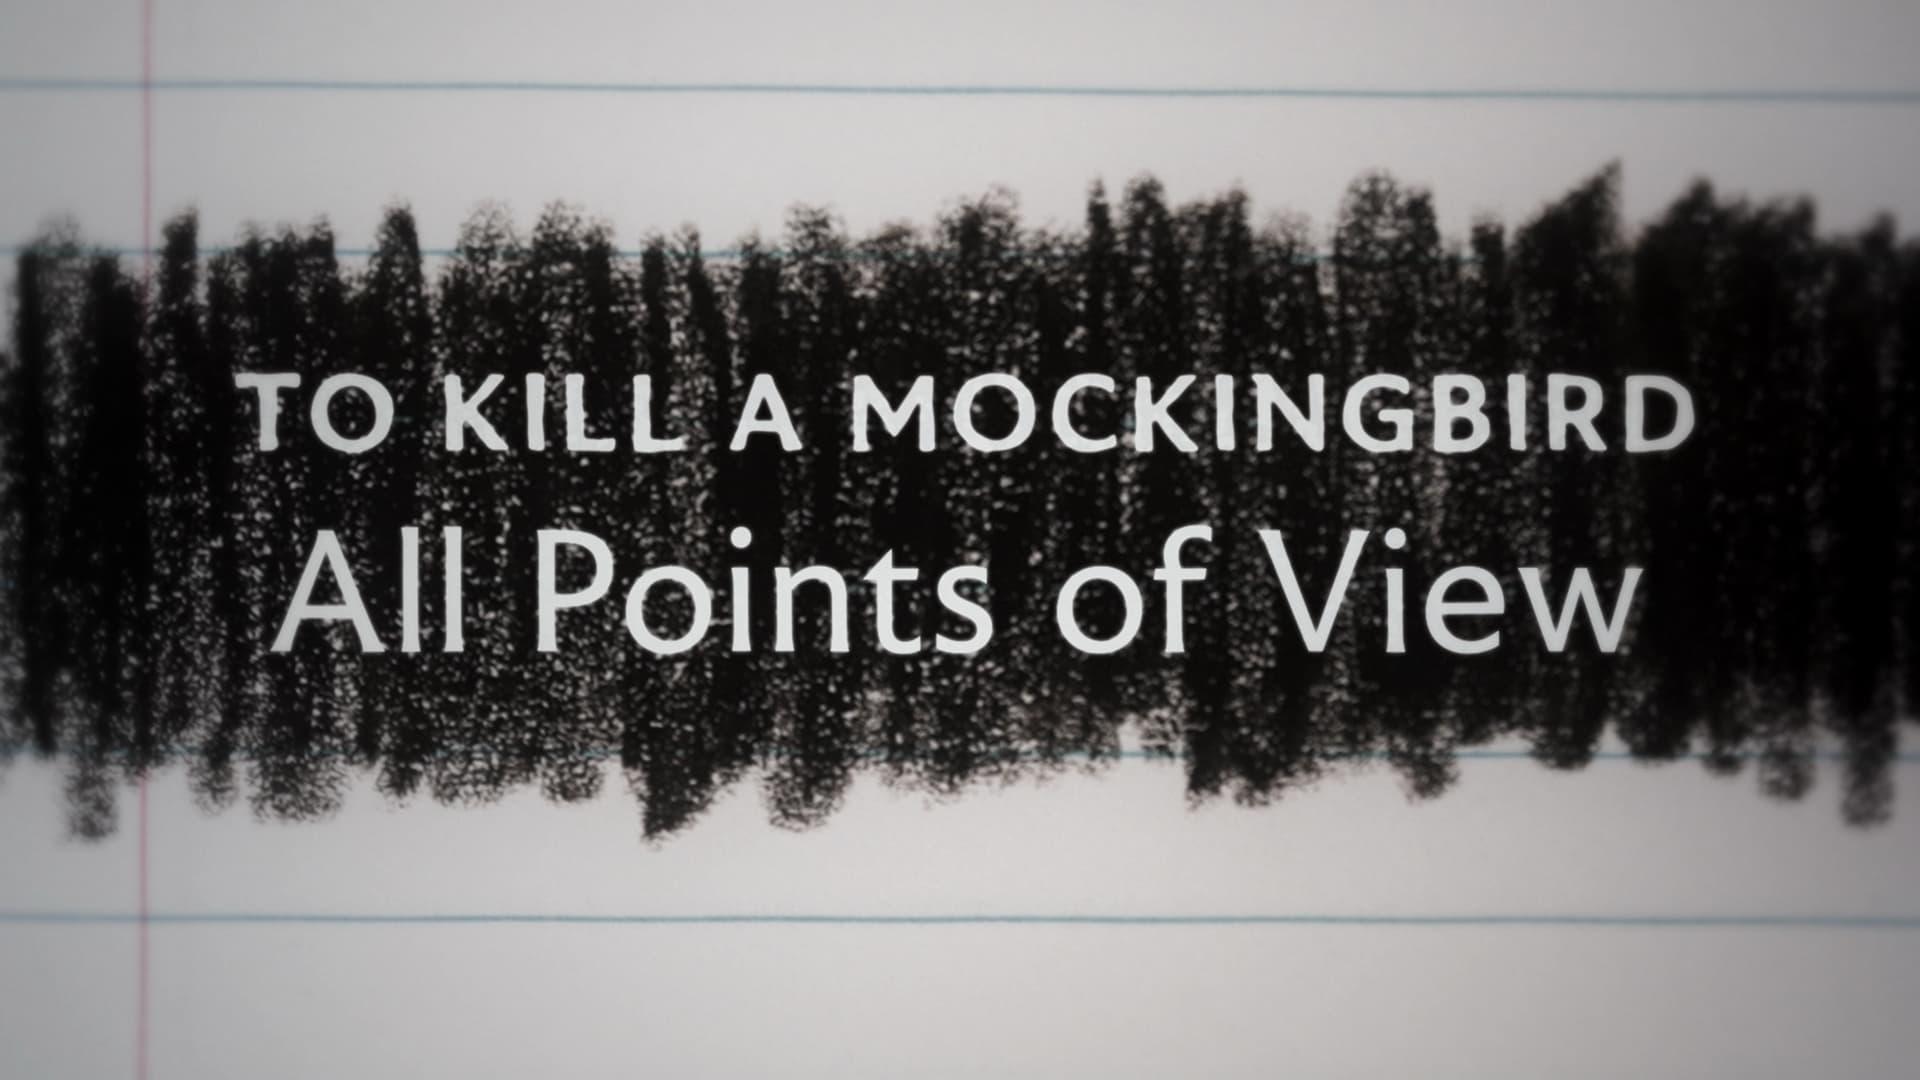 To Kill a Mockingbird: All Points of View backdrop